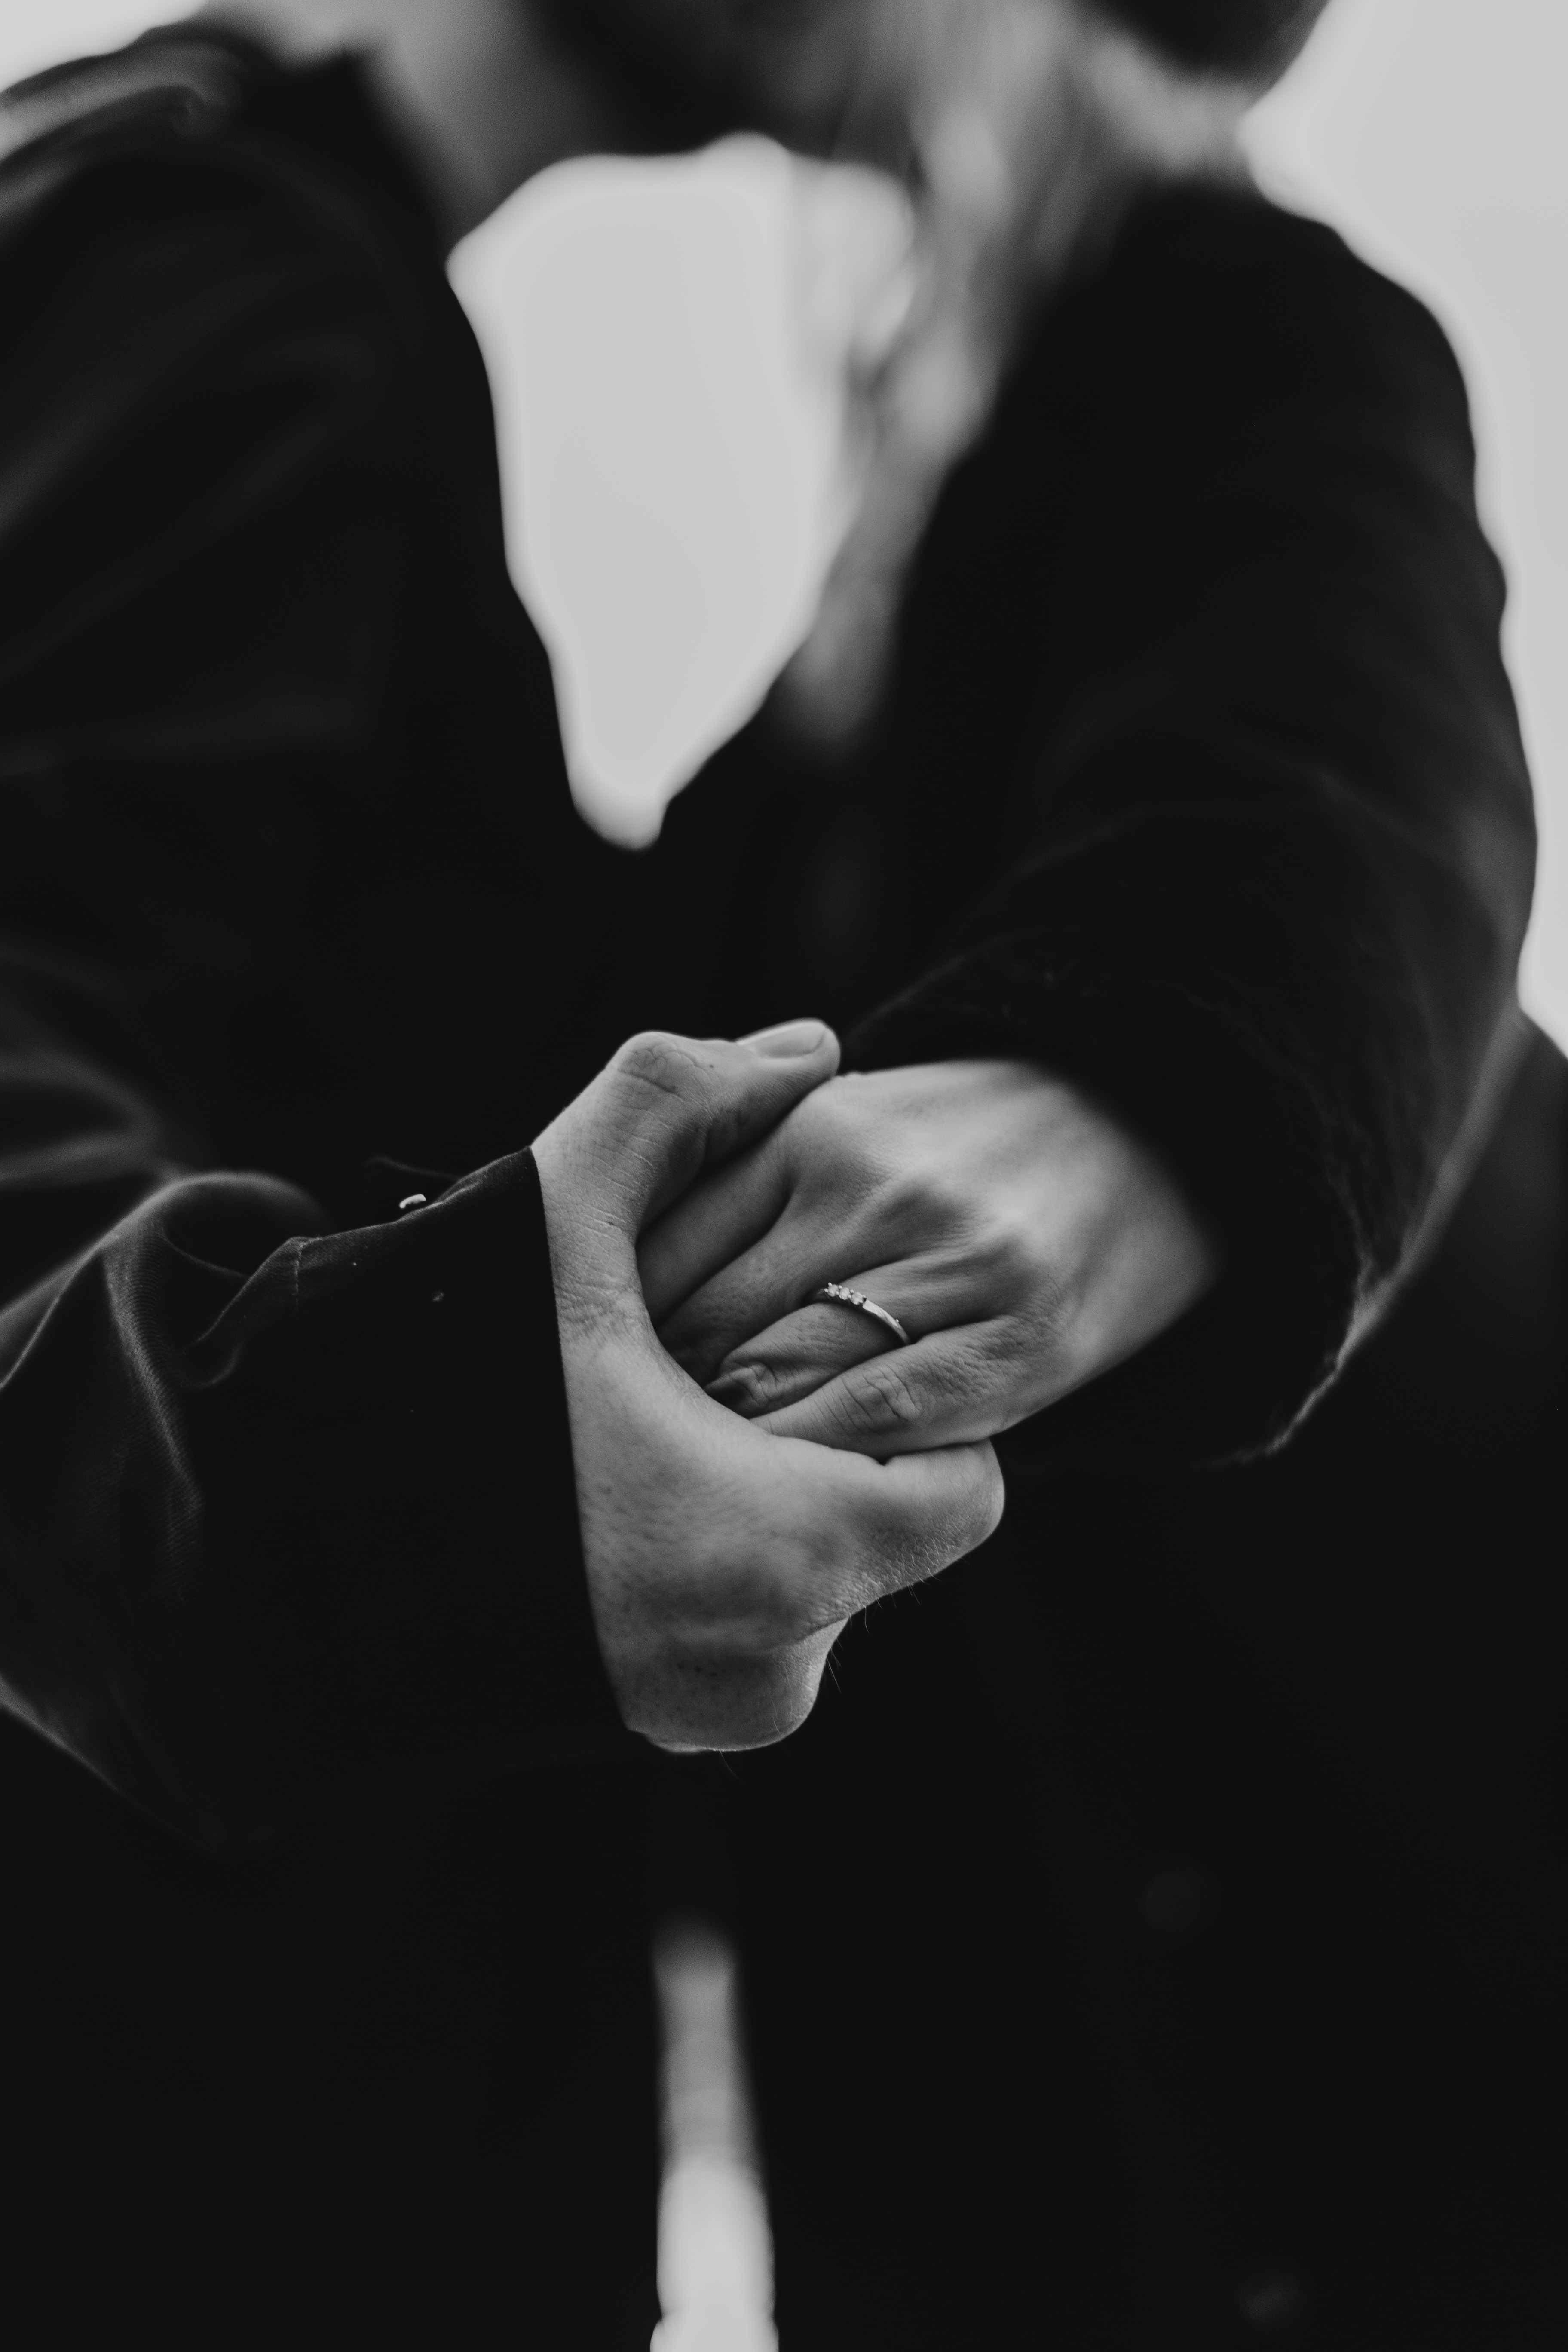 pair, couple, love, hands, bw, chb, romance, tenderness High Definition image